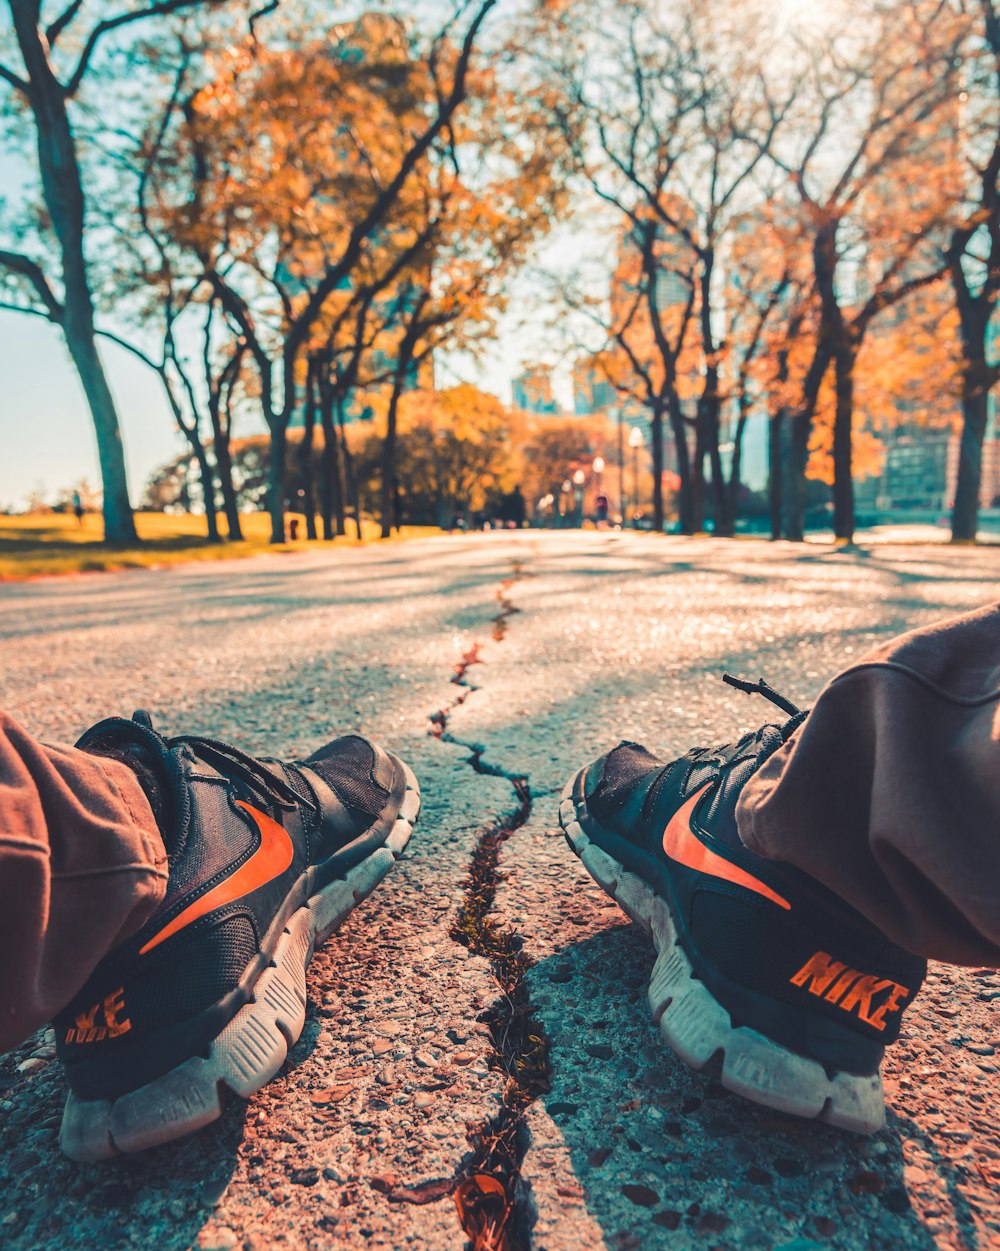 Person wearing Nike running shoes sitting on road outdoor photo – Free  Chicago Image on Unsplash